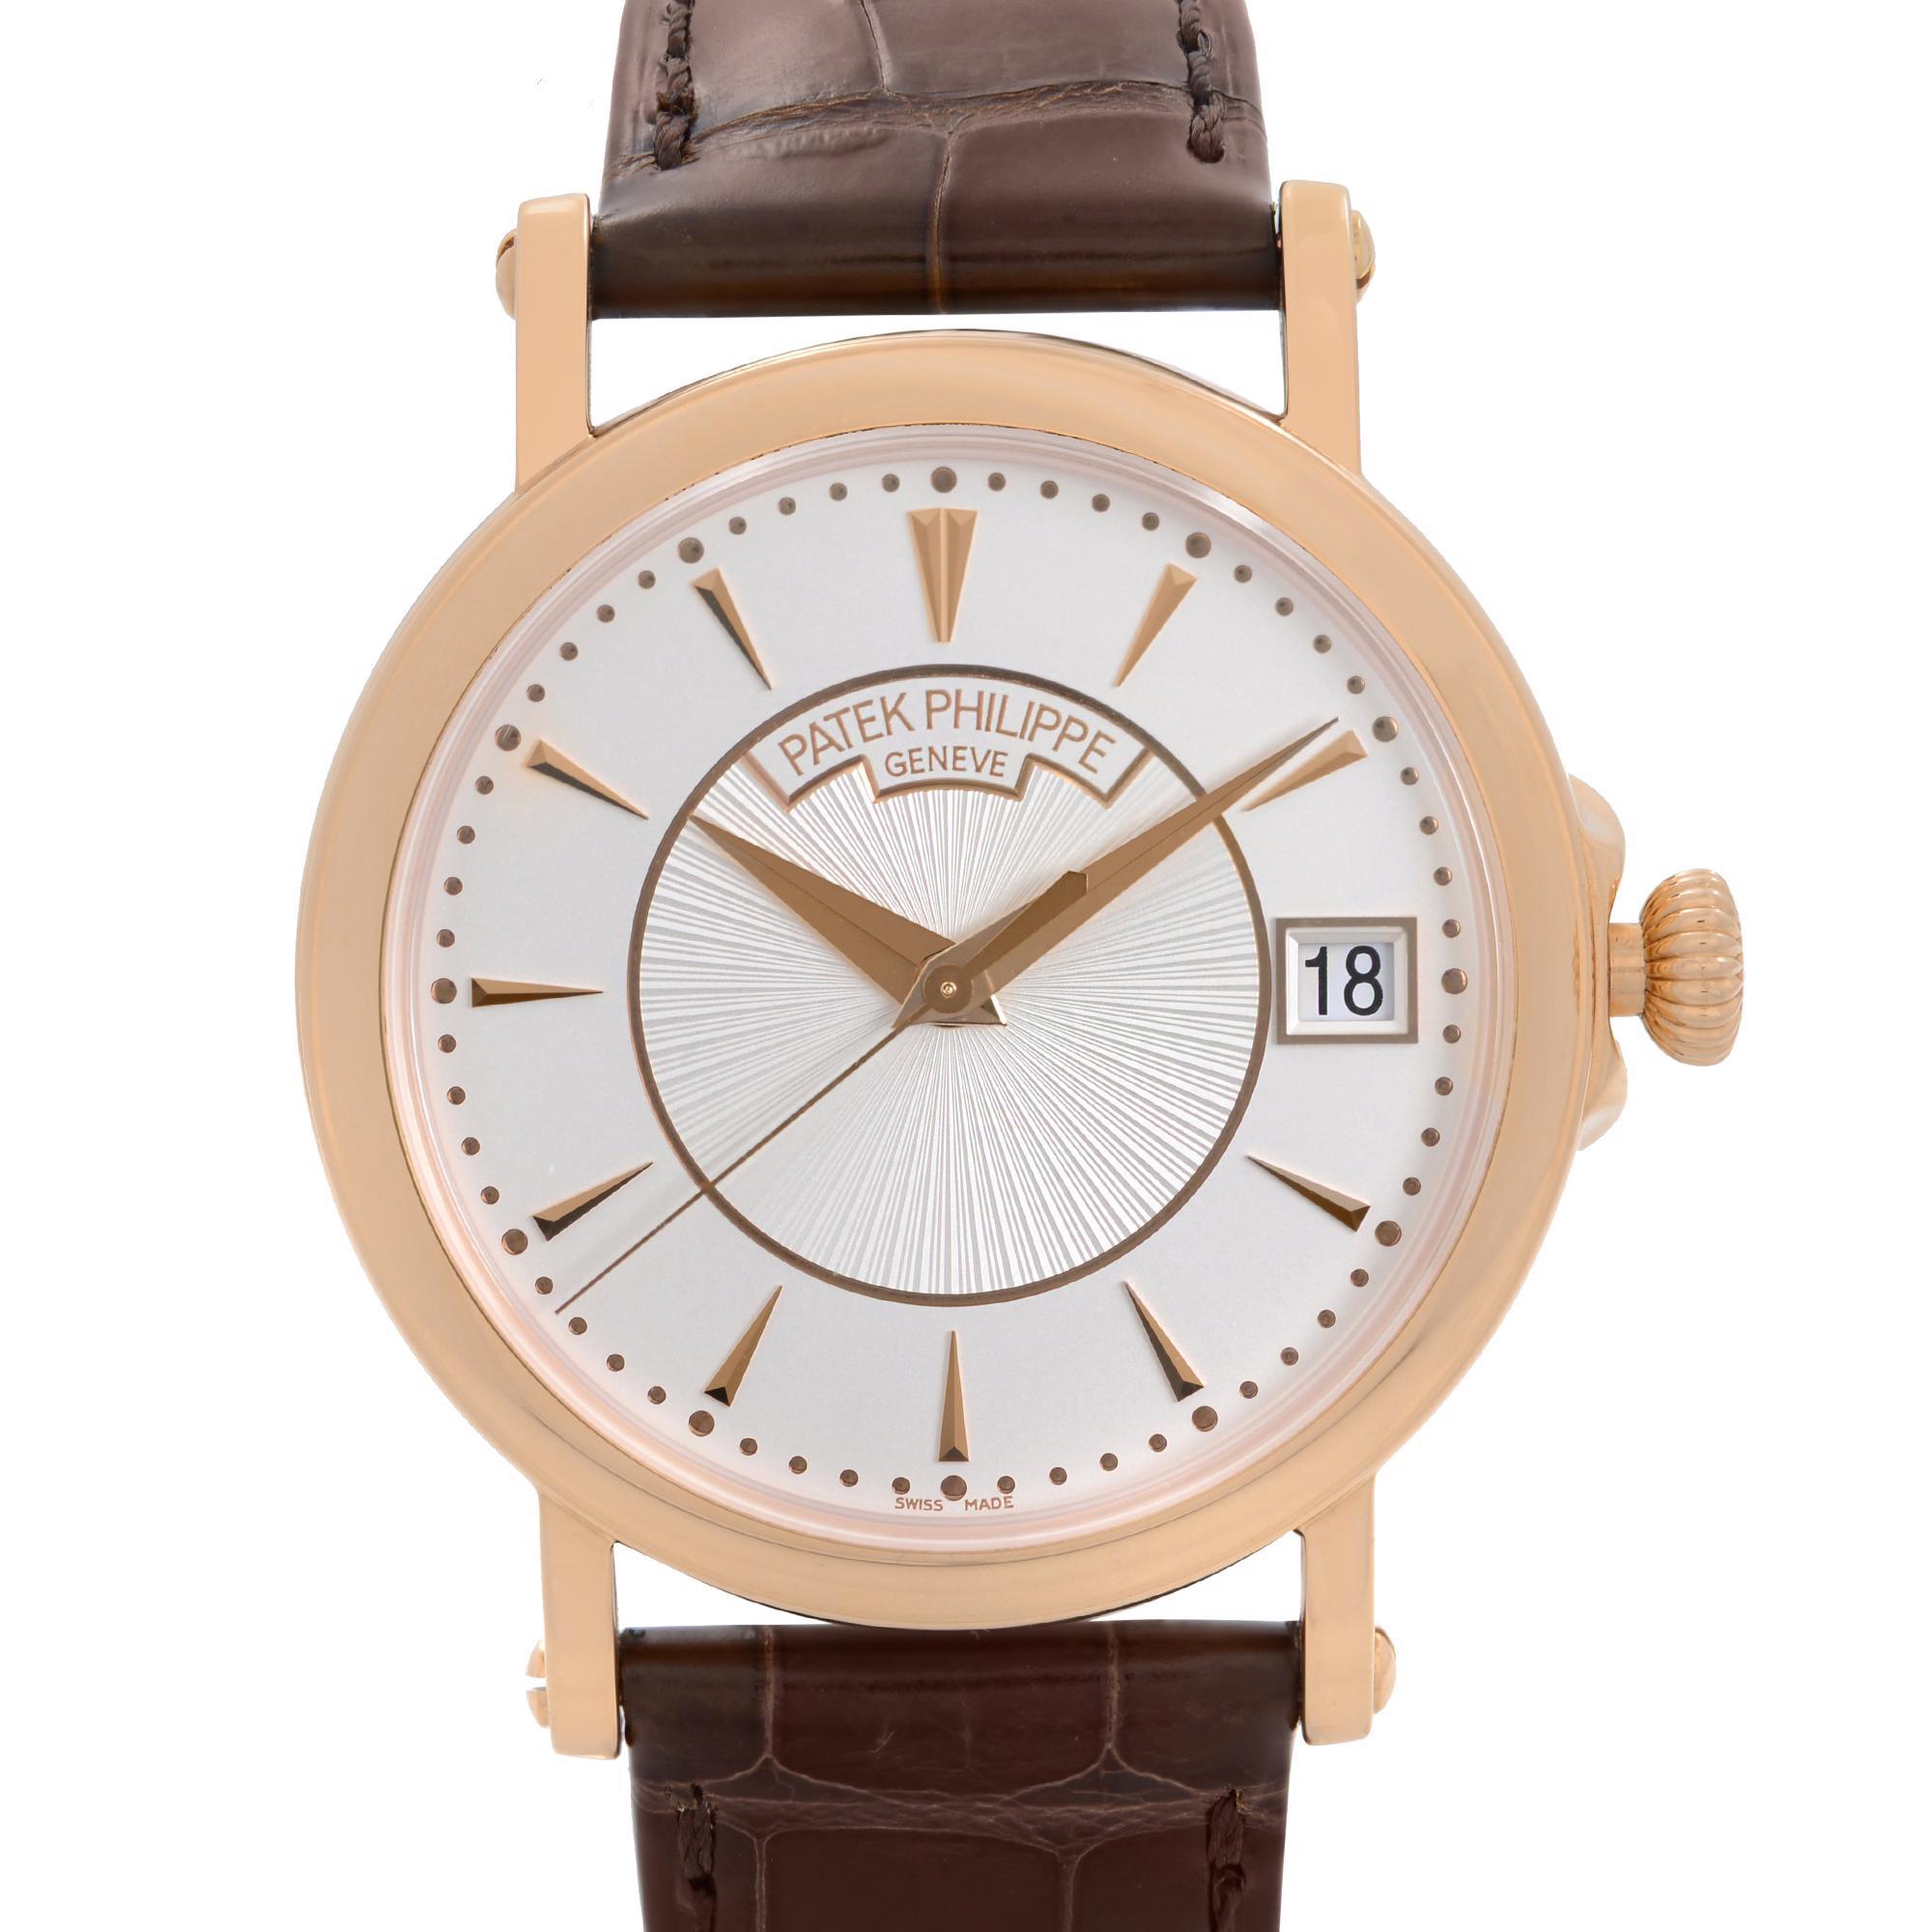 Pre-owned Patek Philippe Calatrava 18K Rose Gold Automatic Mens Watch 5153R-001.  Watch have 2020 Papers. This Beautiful Timepiece is Powered By a Mechanical (Automatic) Movement and Features: 18k Rose Gold Case with a Brown Leather Strap, Fixed 18k